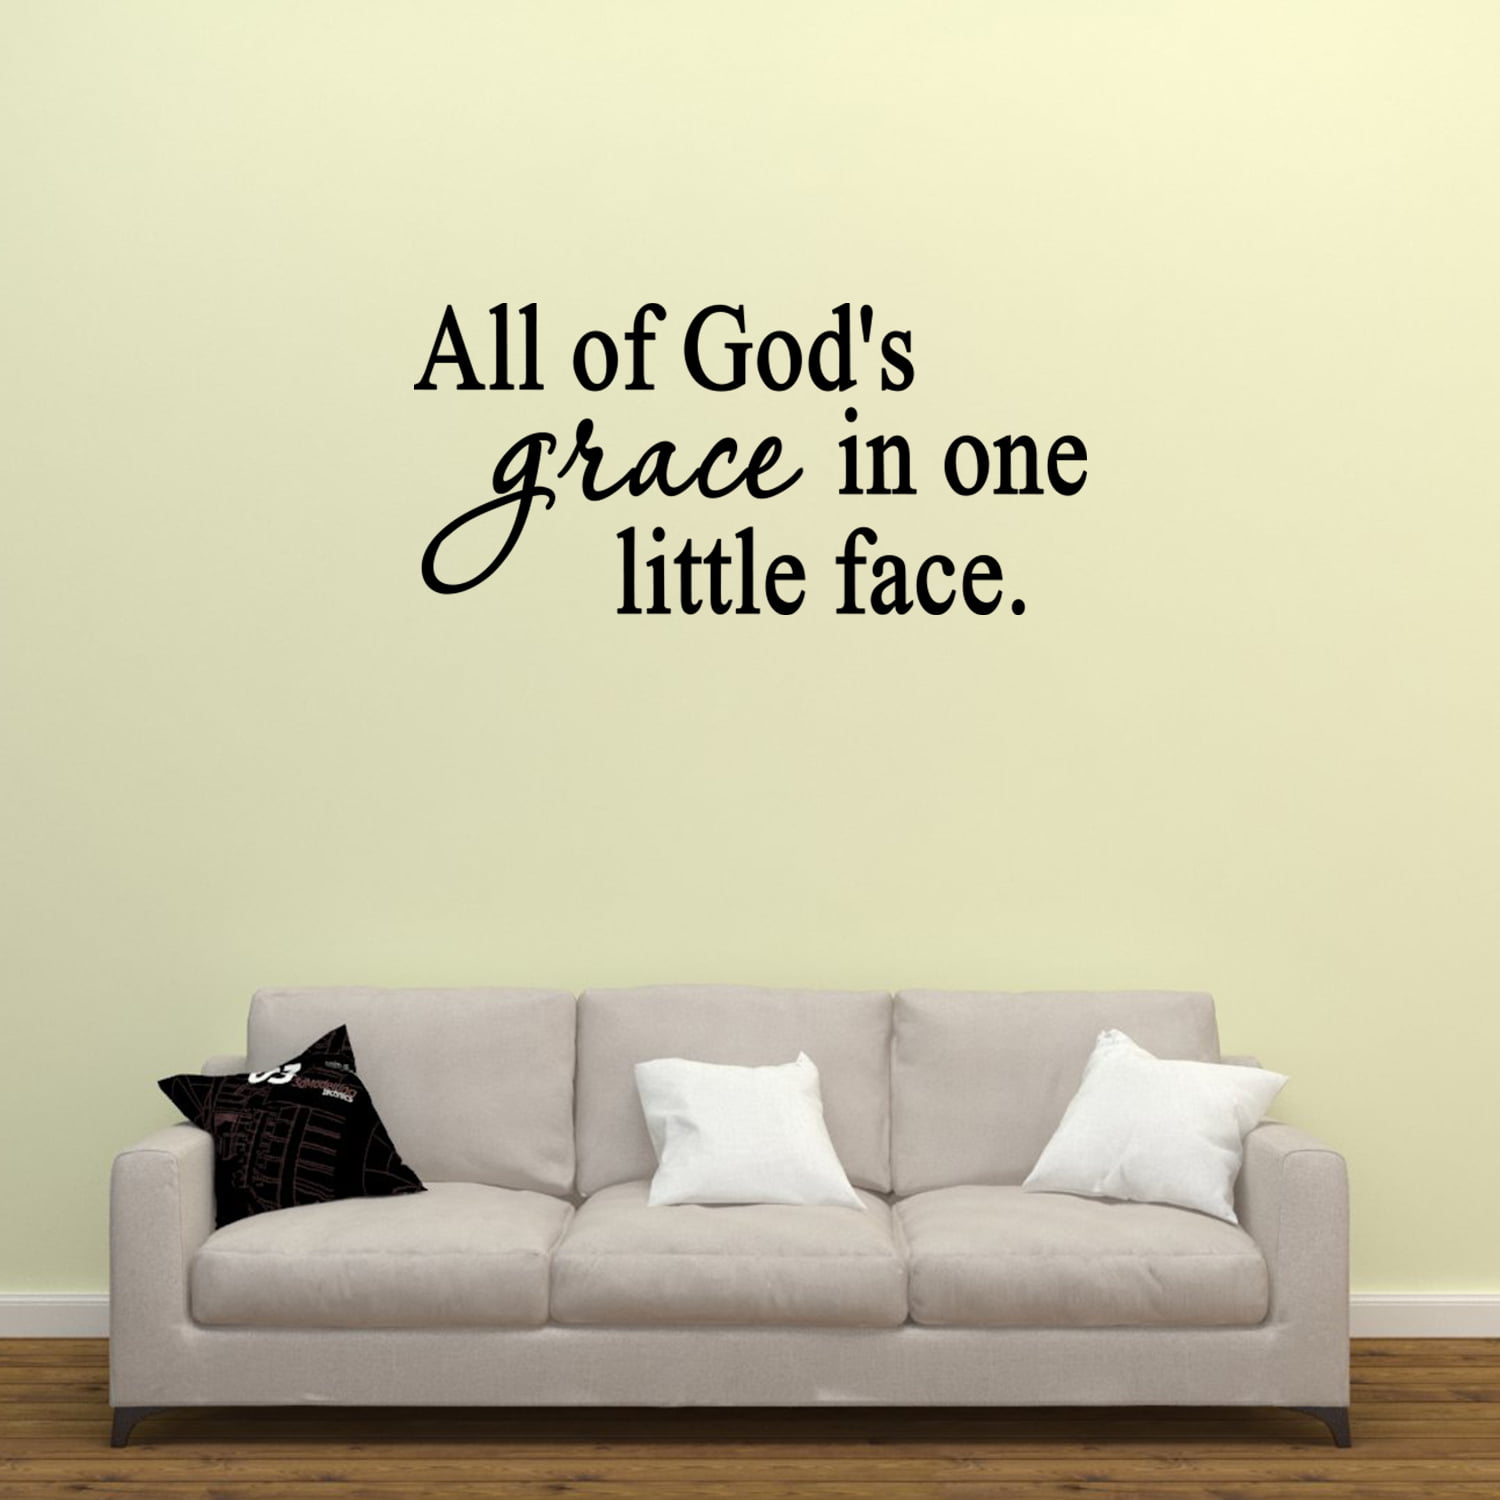 Baby BIb "All of God's Grace in One Little Face" 